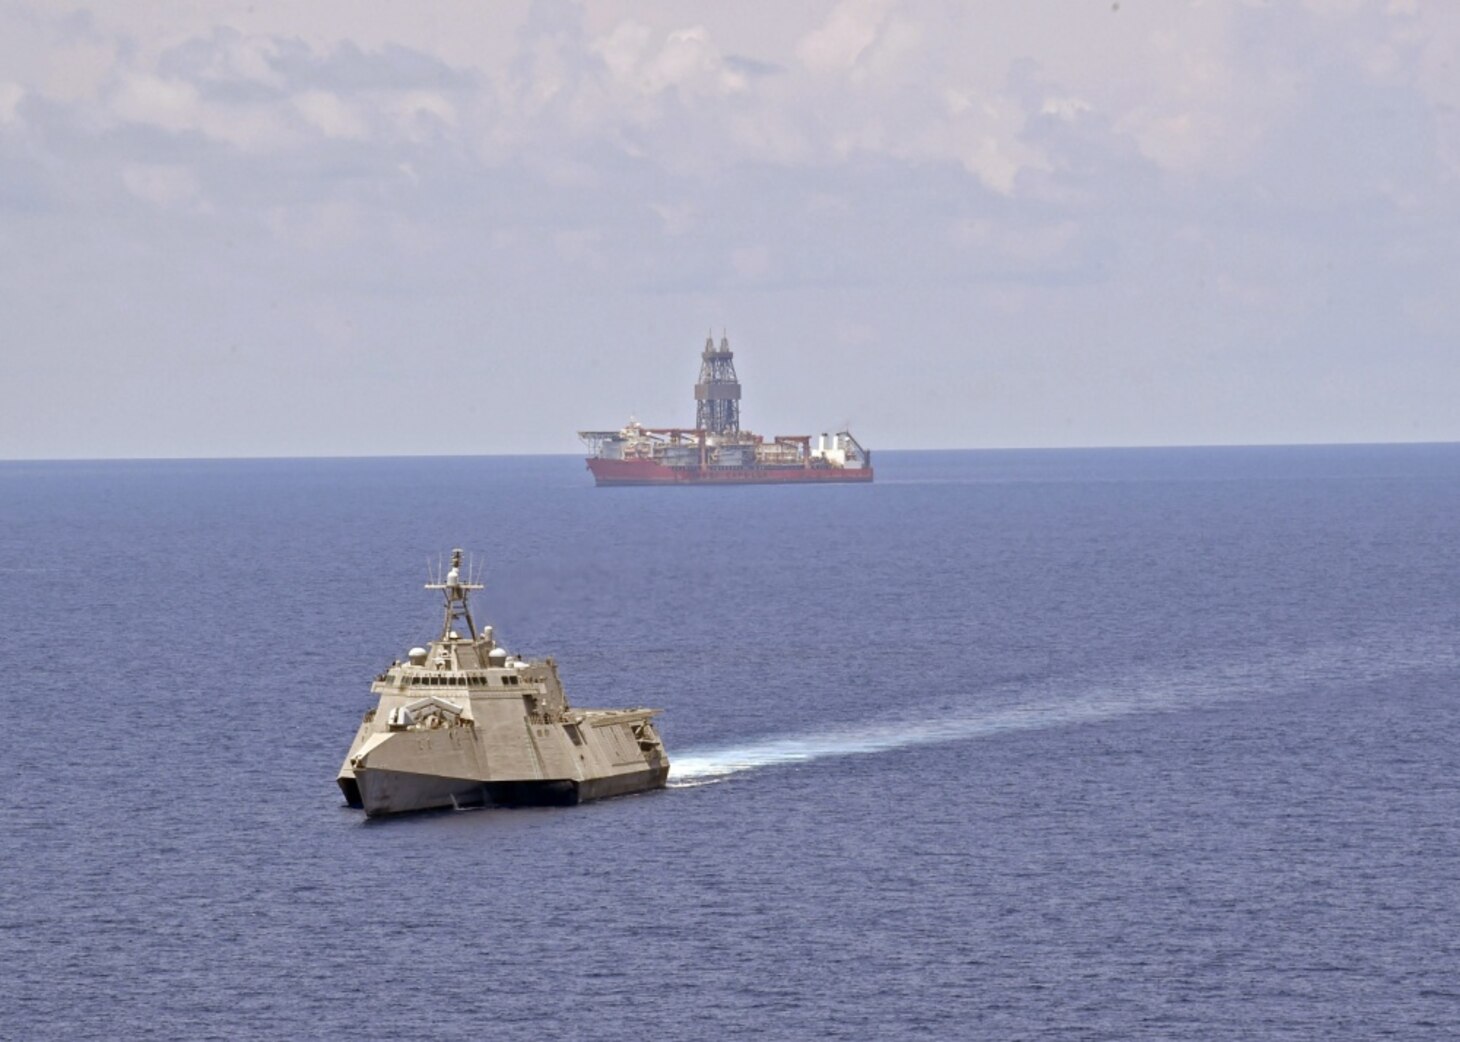 SOUTH CHINA SEA (May 12, 2020) The Independence-variant littoral combat ship USS Gabrielle Giffords (LCS 10) conducts routine operations near the Panamanian flagged drill ship, West Capella, May 12, 2020. Gabrielle Giffords, part of Destroyer Squadron Seven, is on a rotational deployment, operating in the U.S. 7th Fleet area of operations to enhance interoperability with partners and serve as a ready-response force.